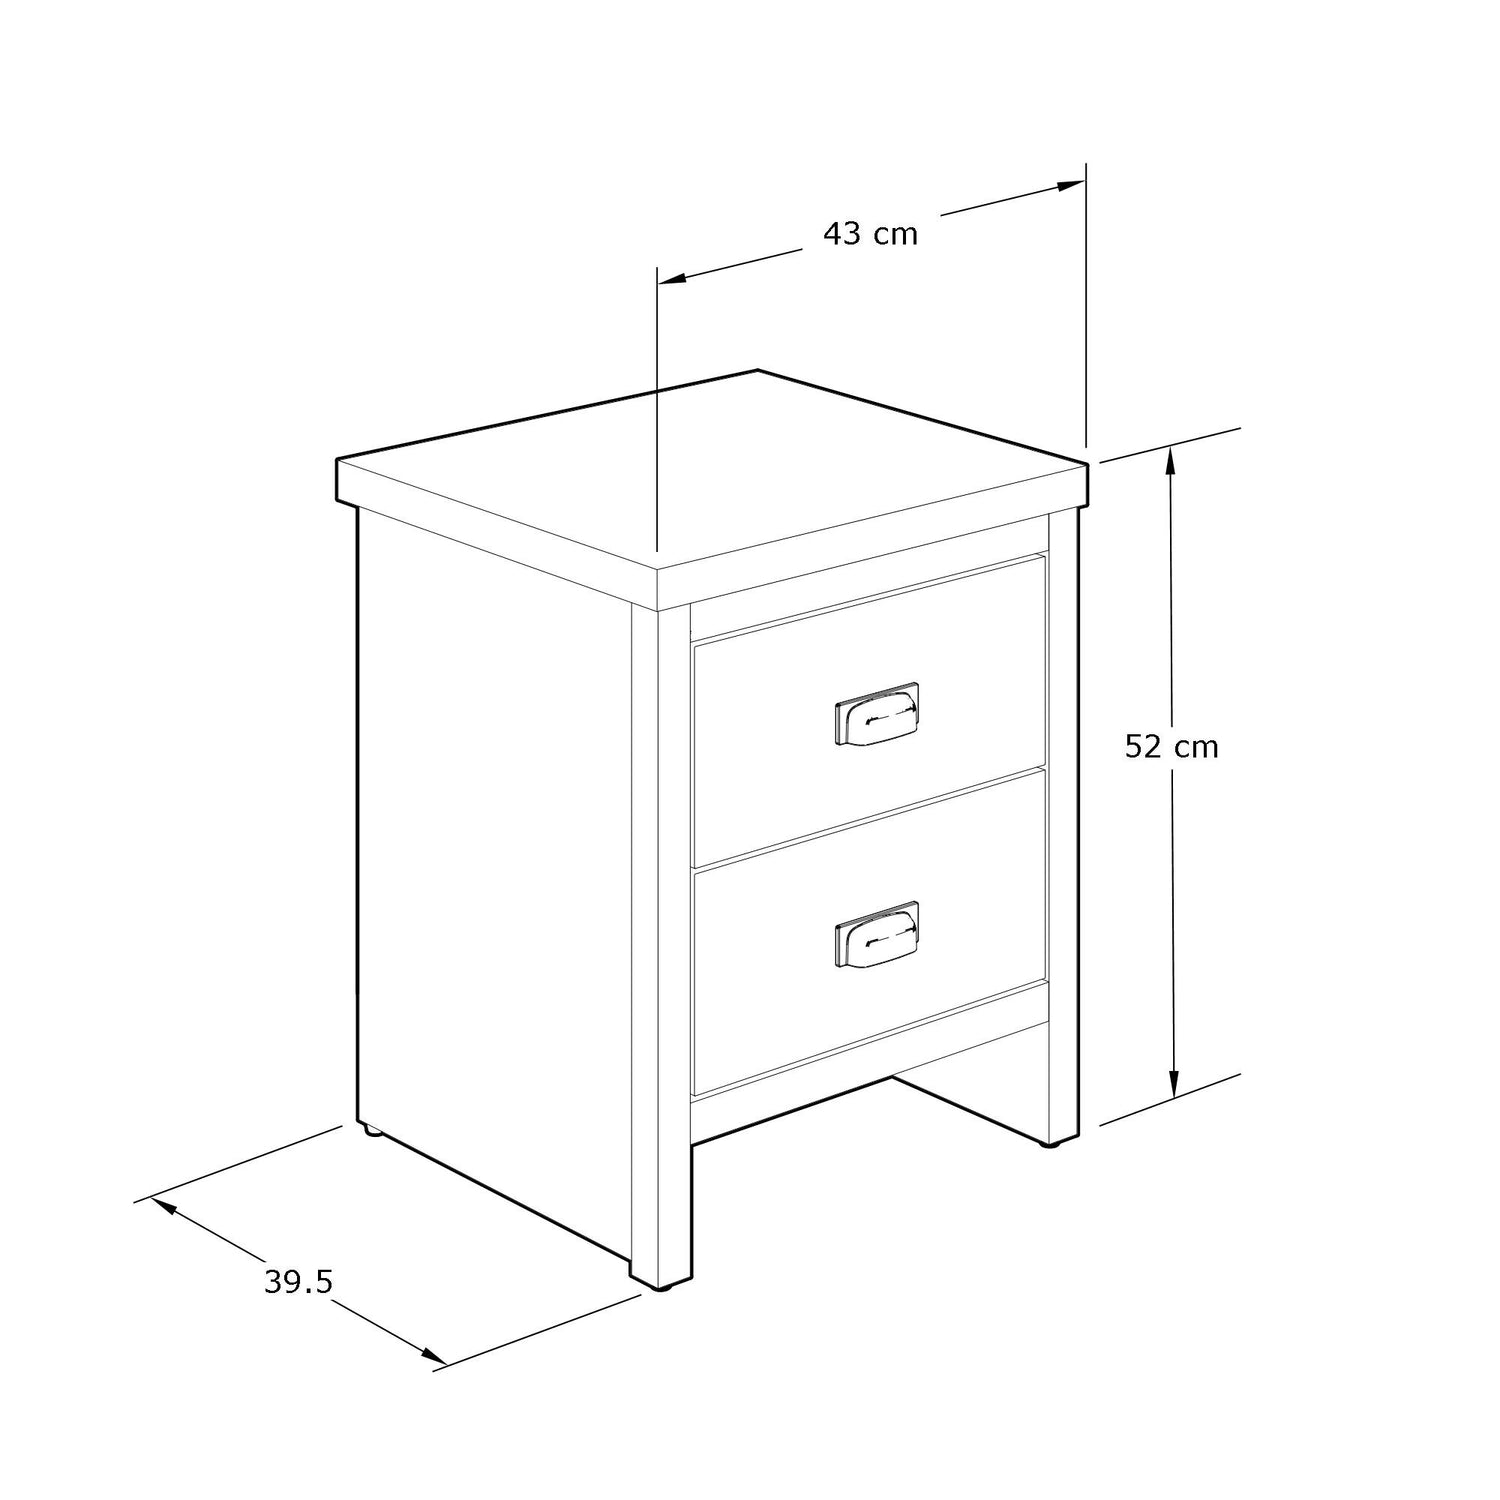 GFW Boston 2 Drawer Bedside Table Dimensions-Better Bed Company